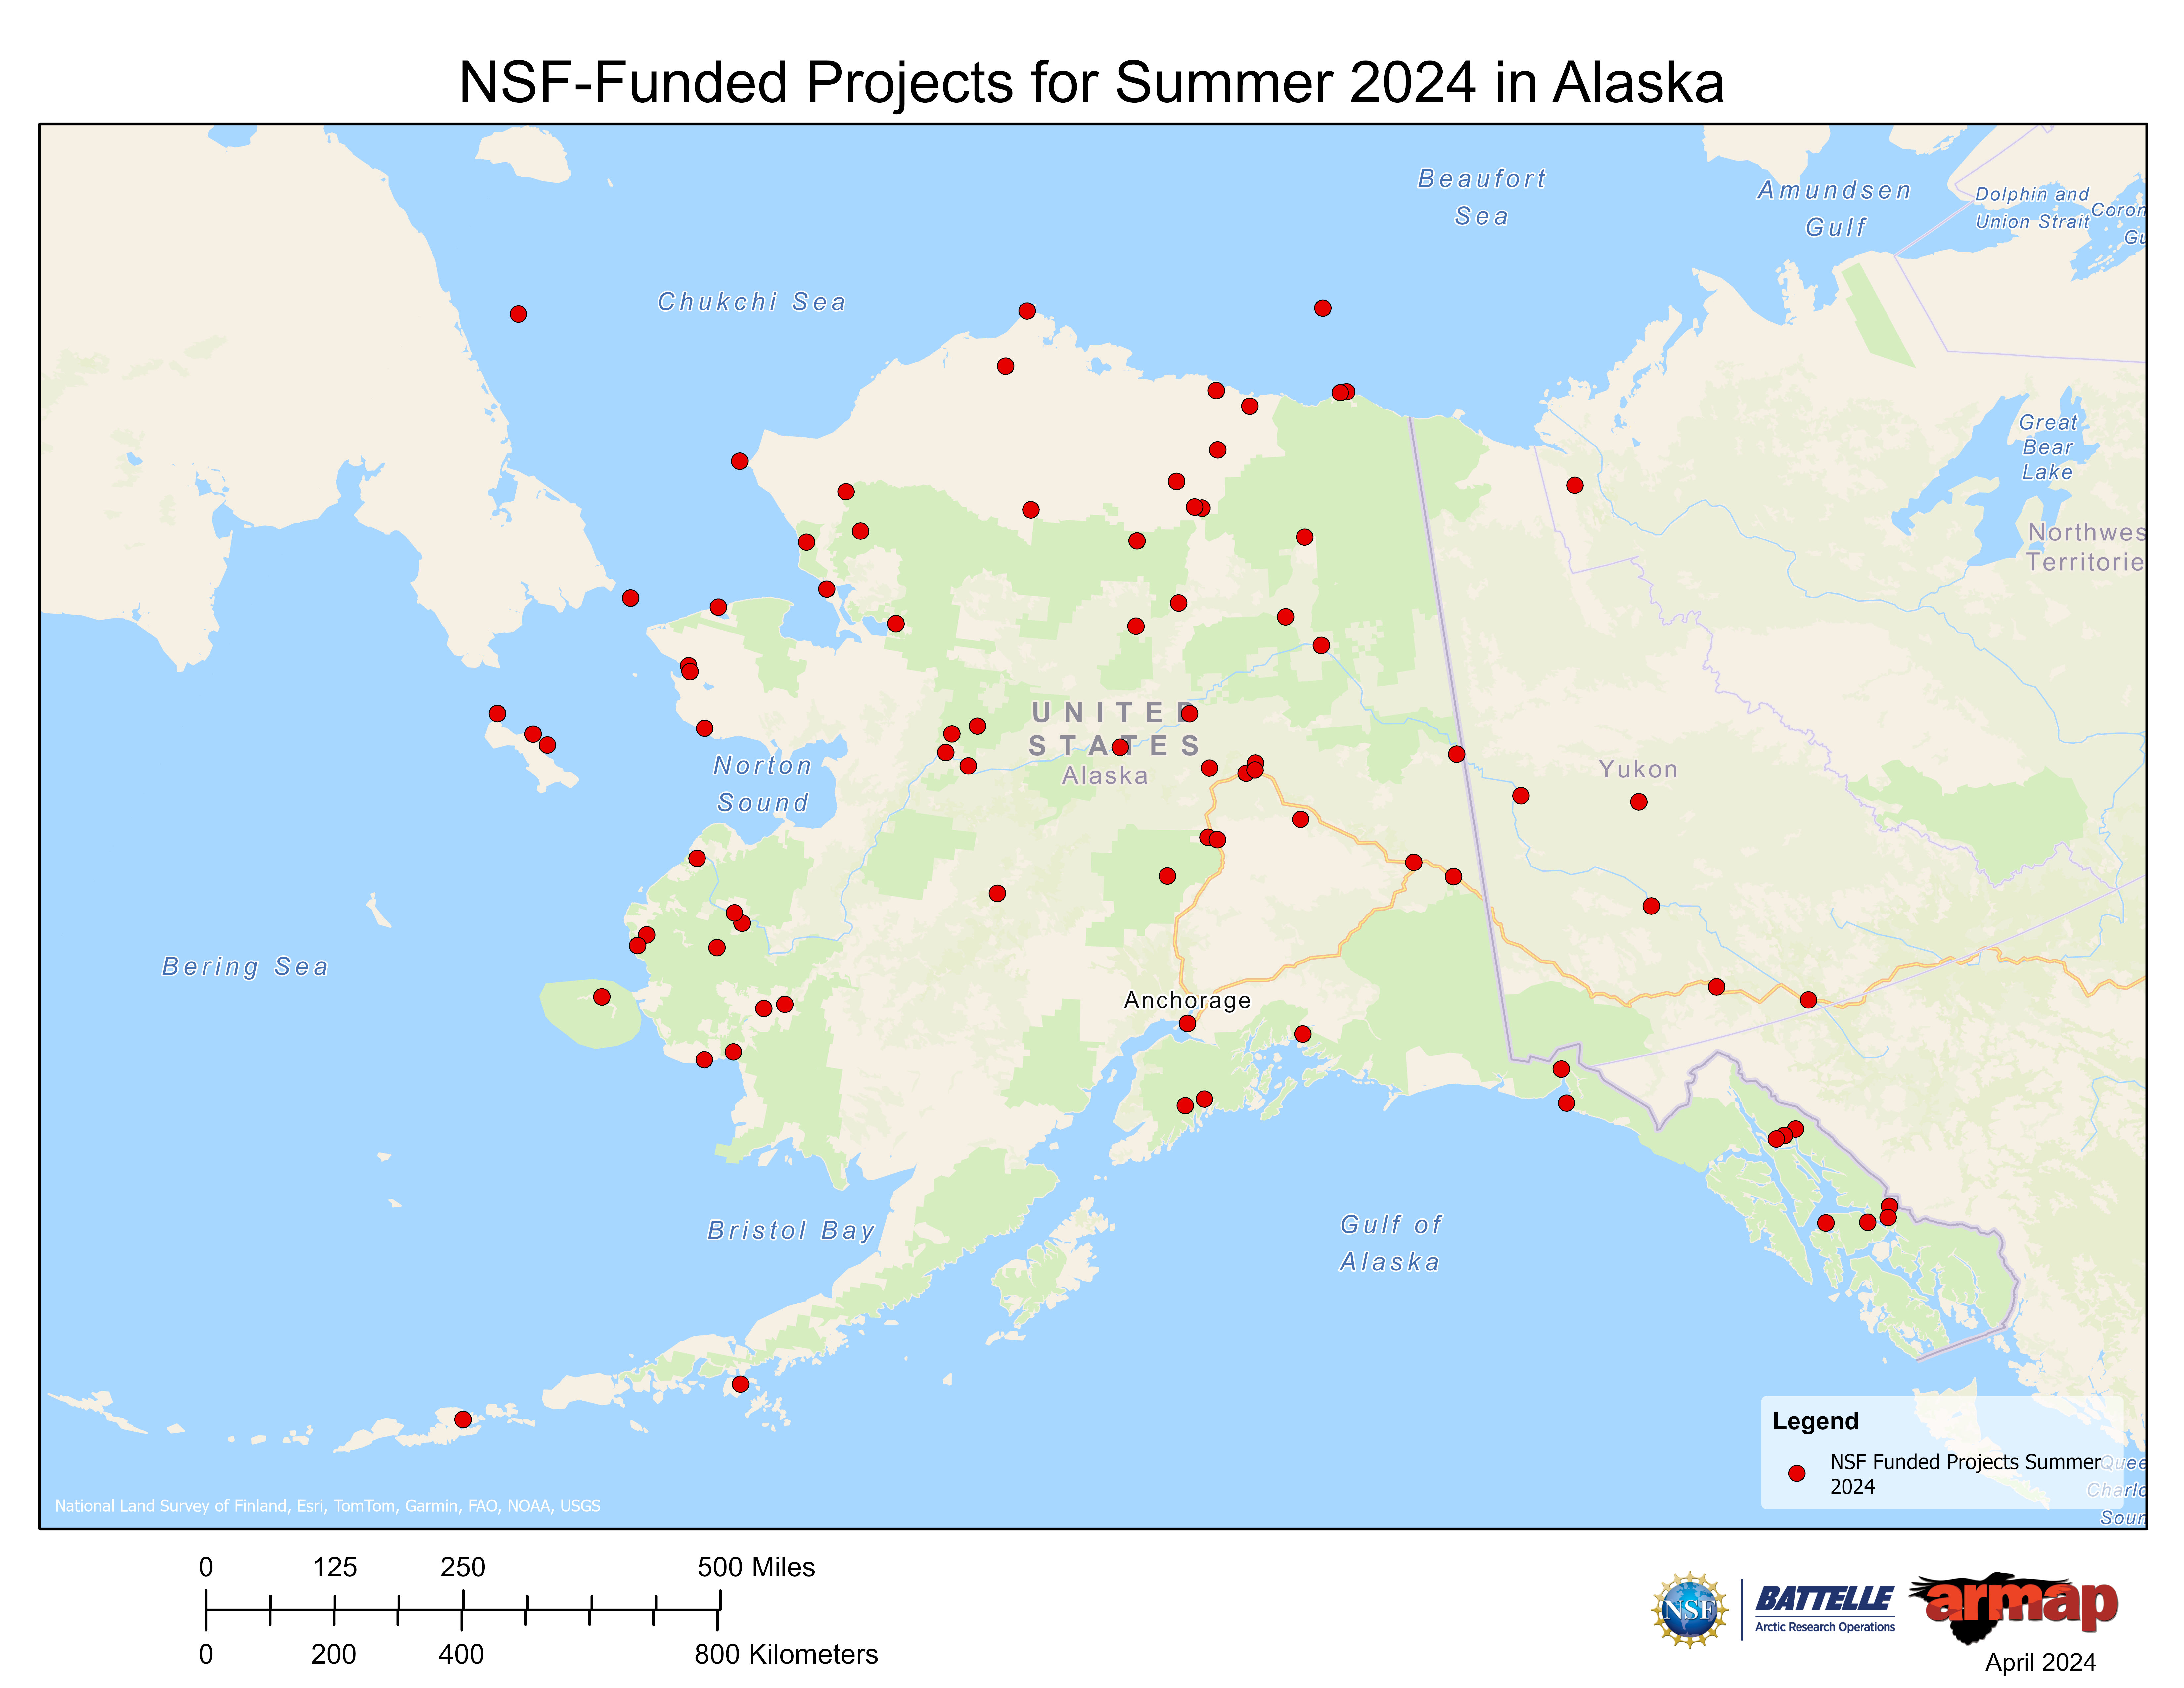 NSF-Funded Projects for Alaska, Summer of this Year